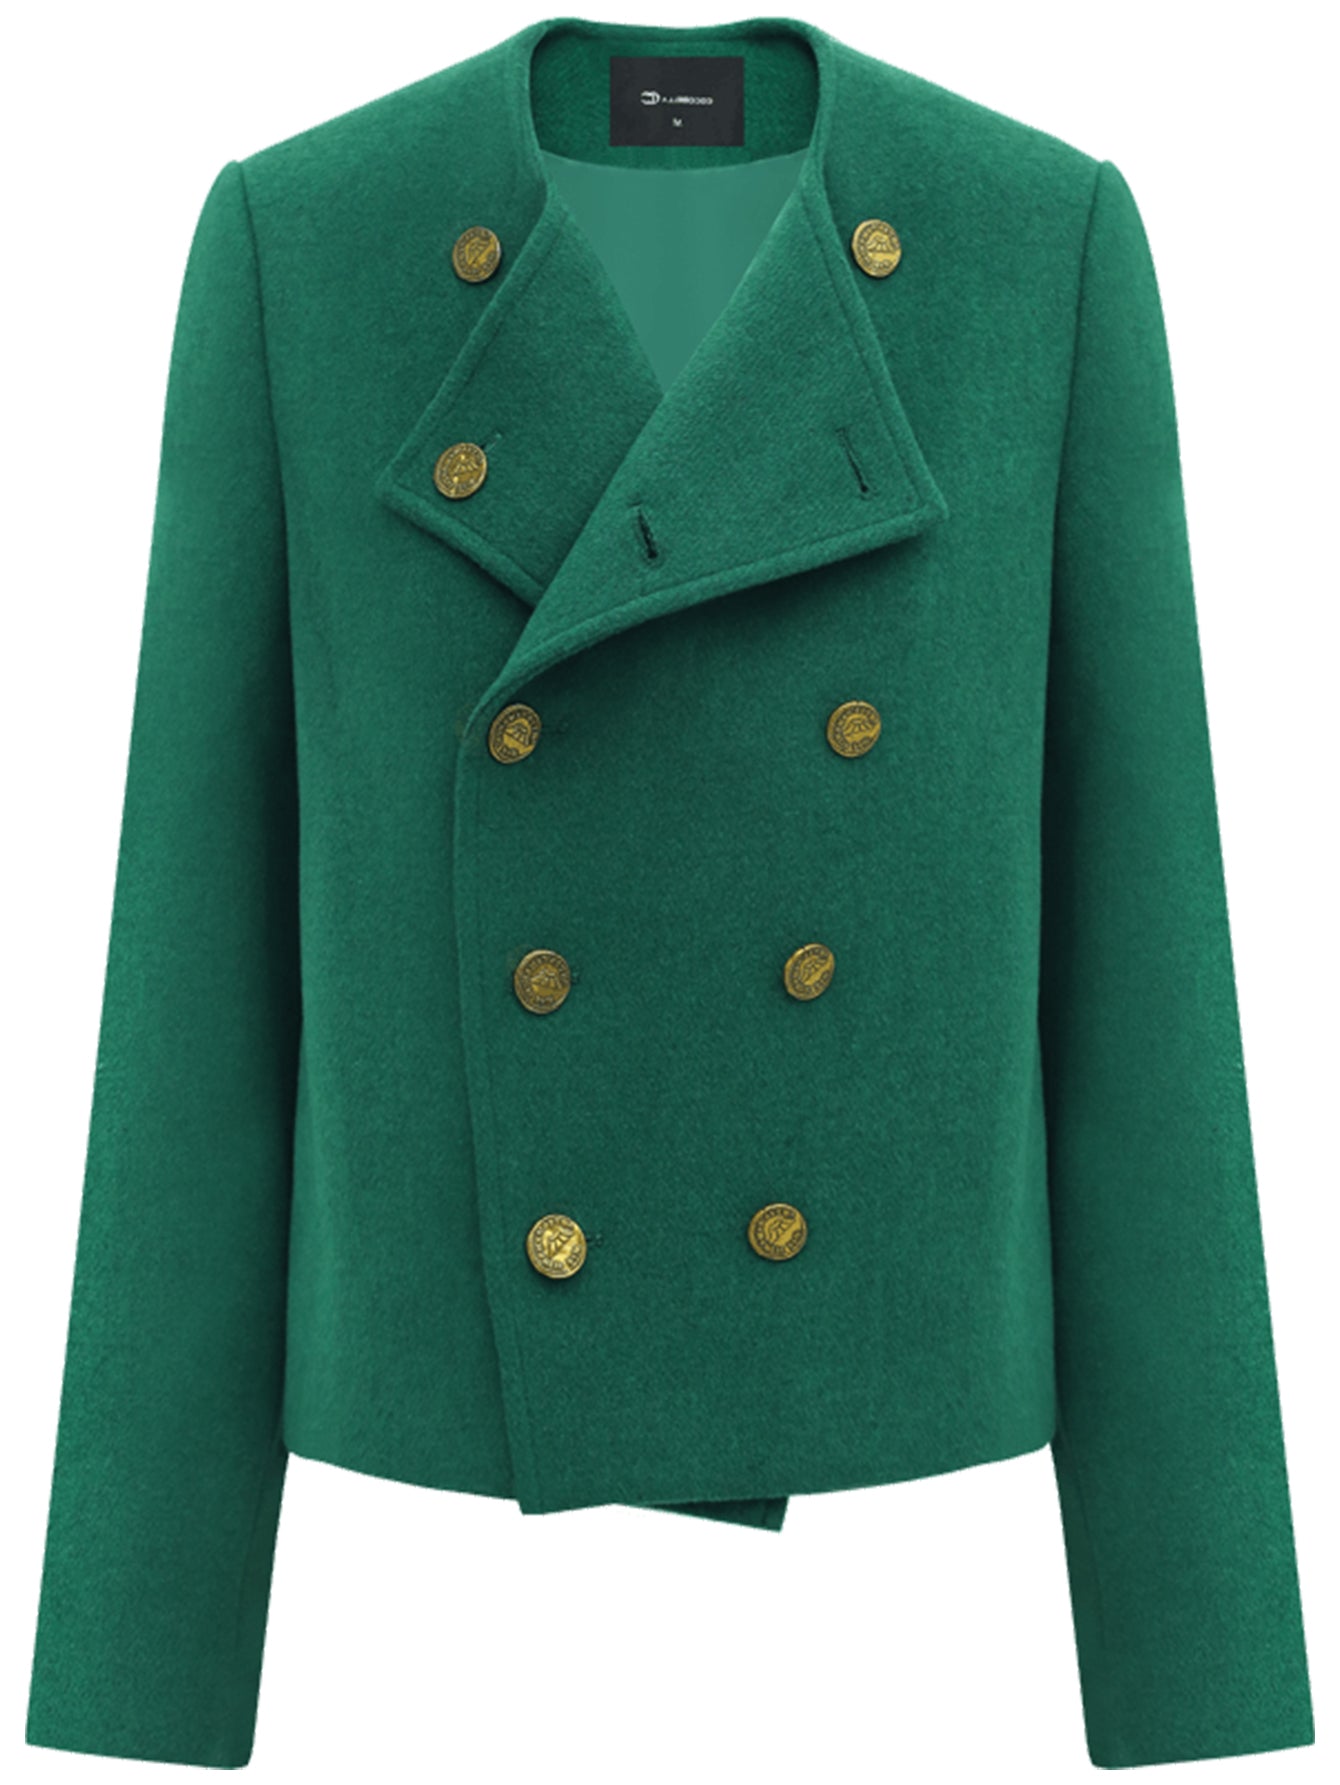 green-double-breasted-wool-blend-jacket_all_green_4.jpg